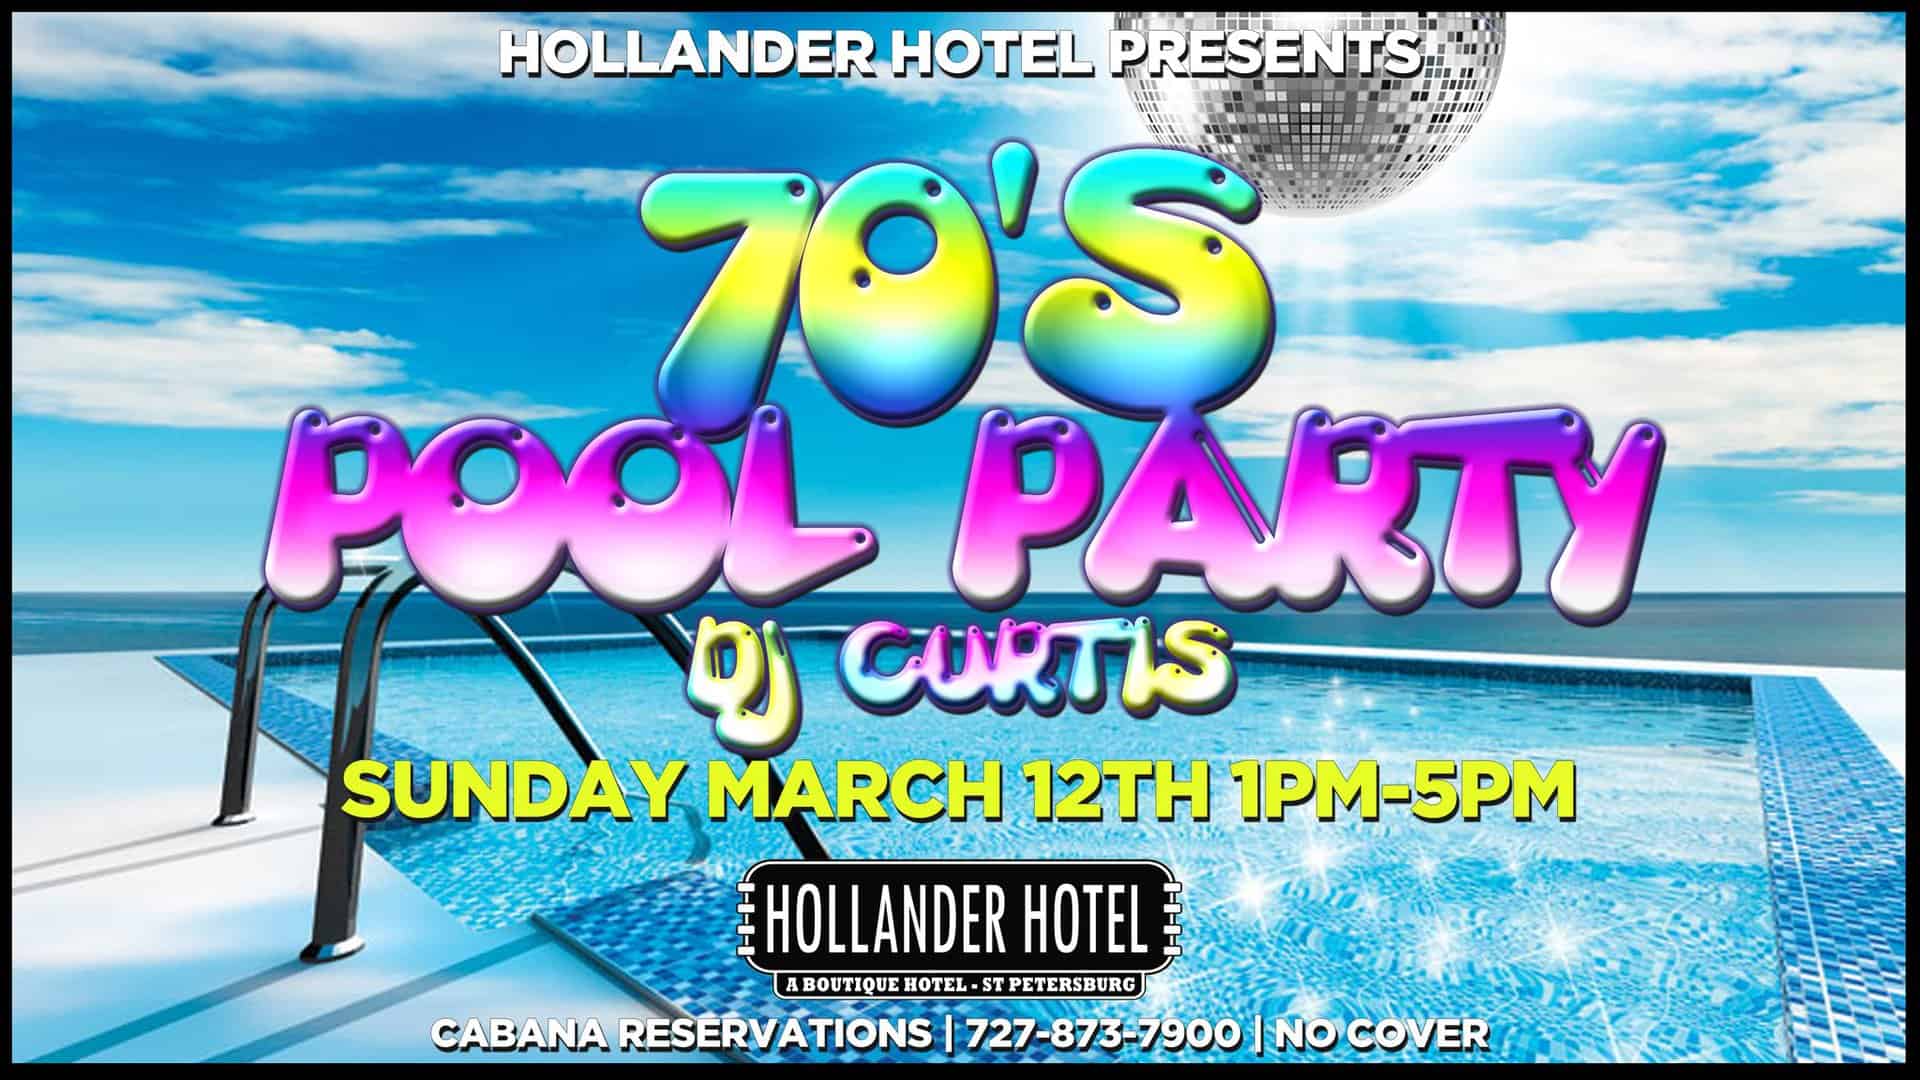 70'a Pool Party with Curtis James, Taetro & JB Nicotera at the Hollander Hotel